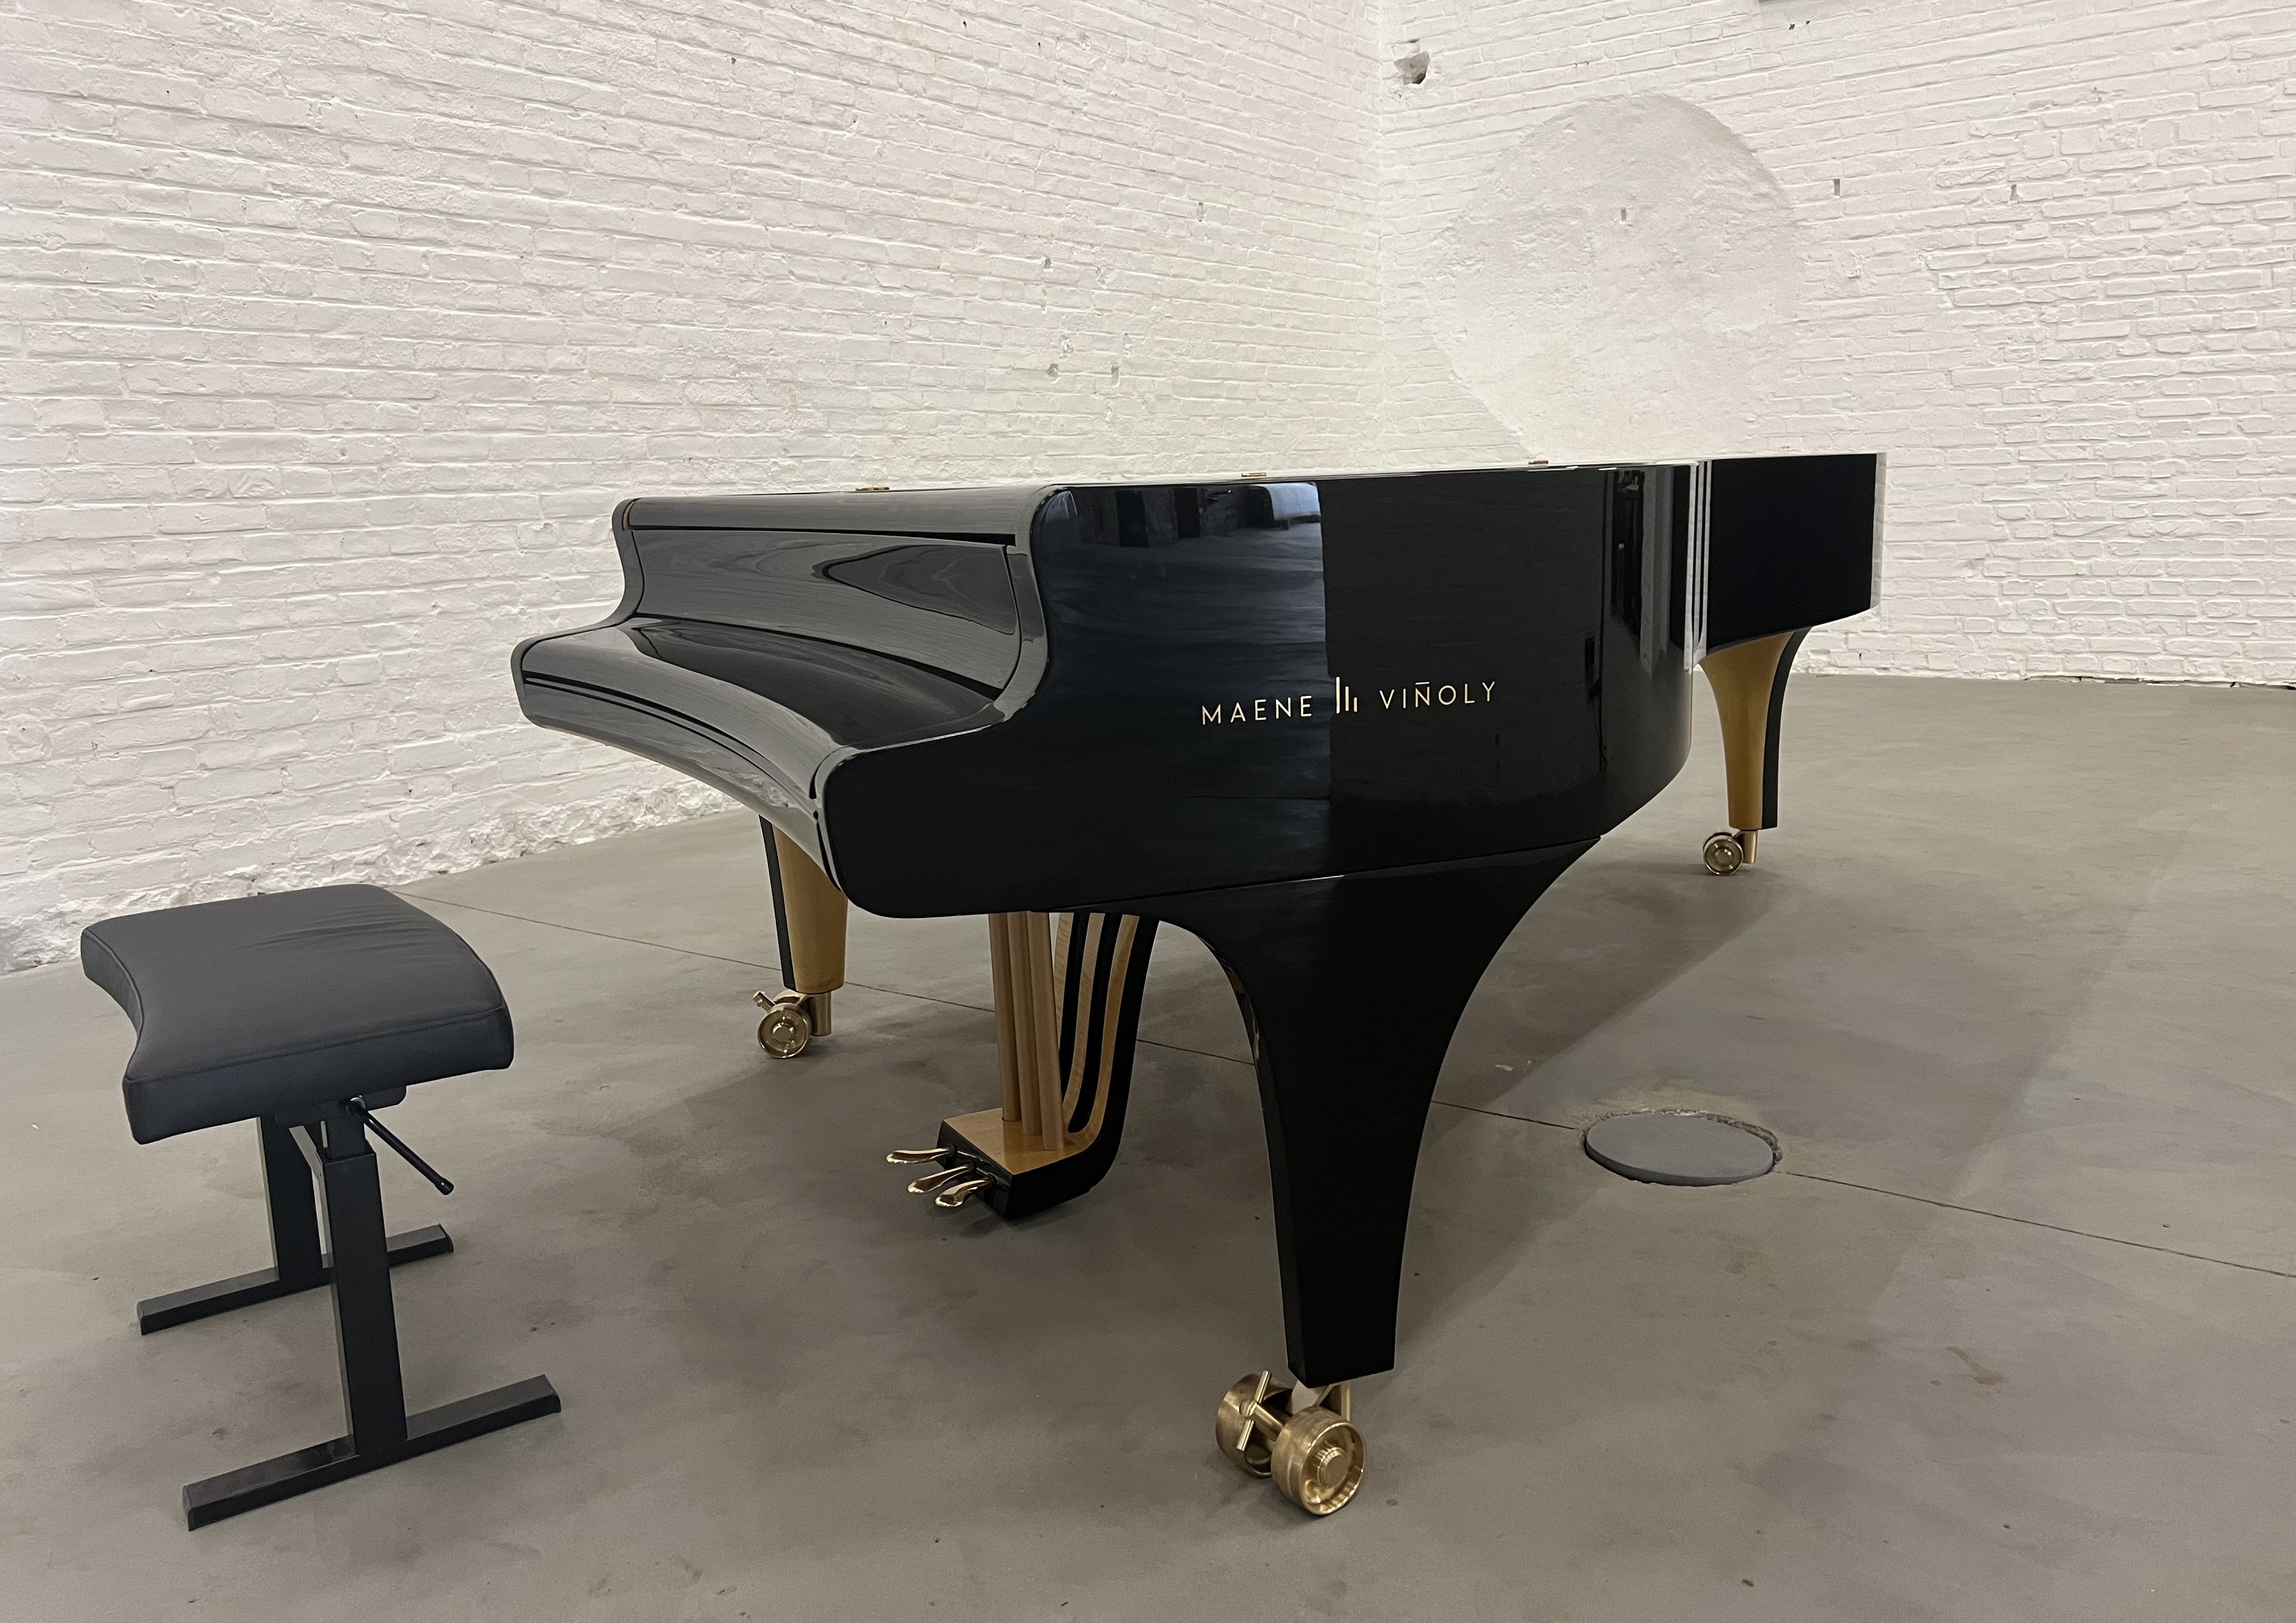 A piano designed for middle-aged spread